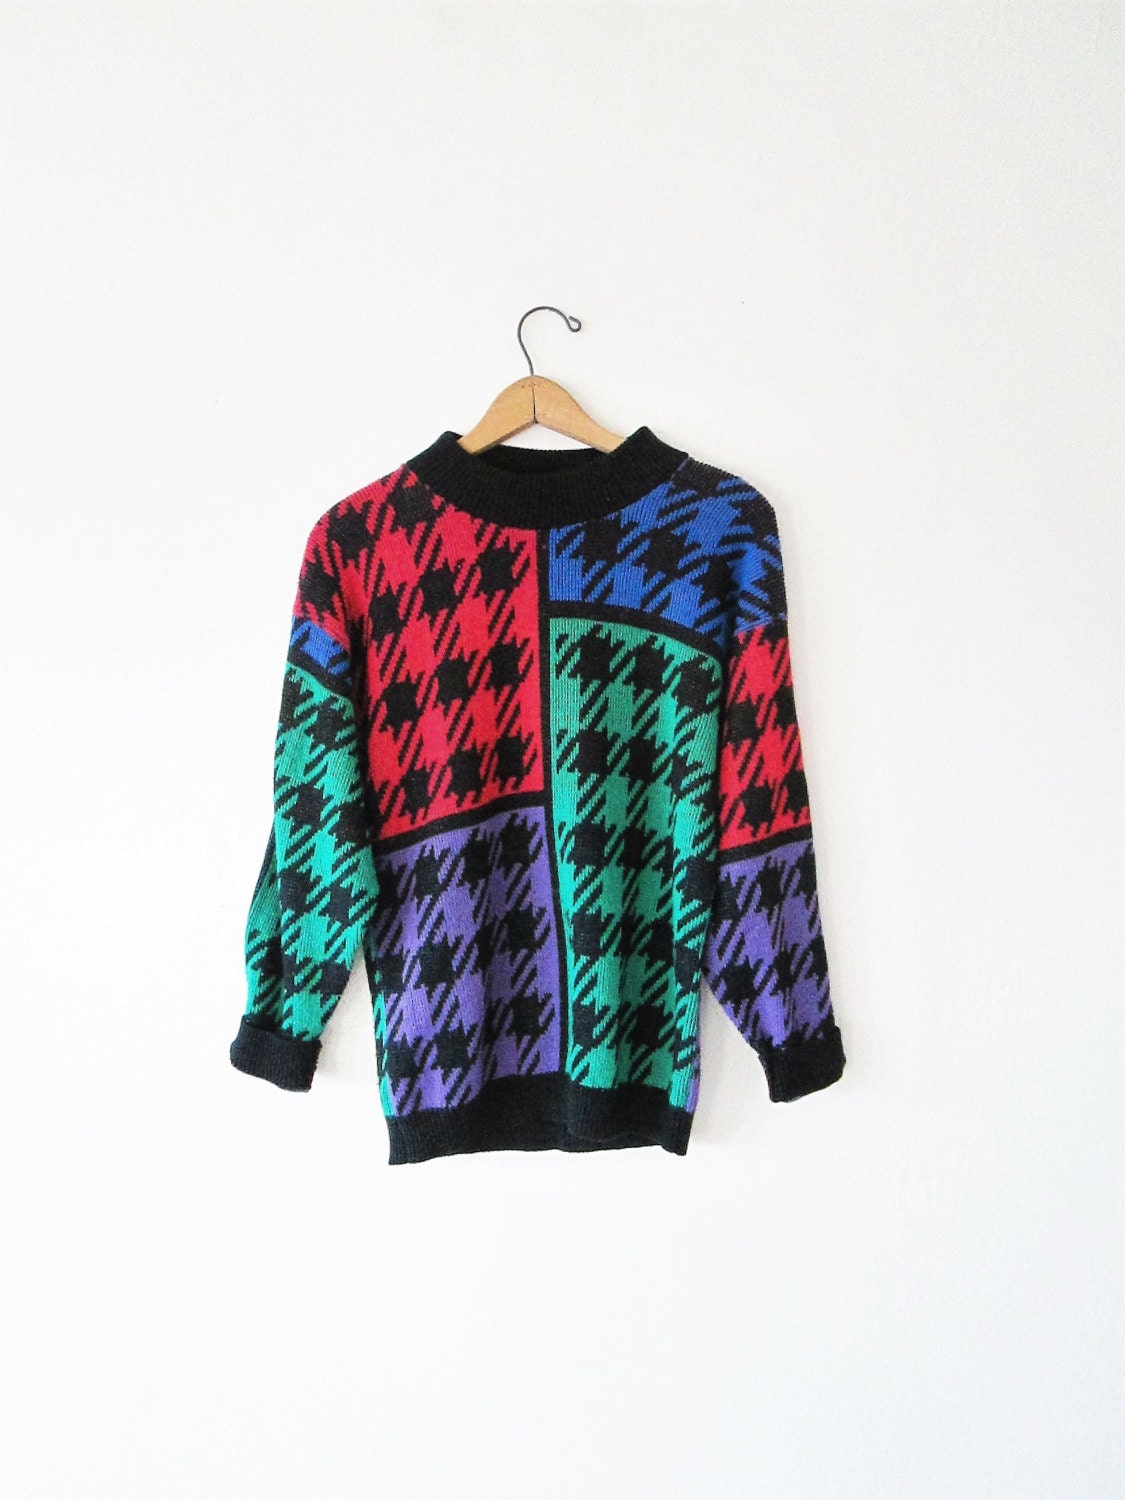 Wms Vintage 1980's GLAMOUR KNITS RAINBOW Houndstooth